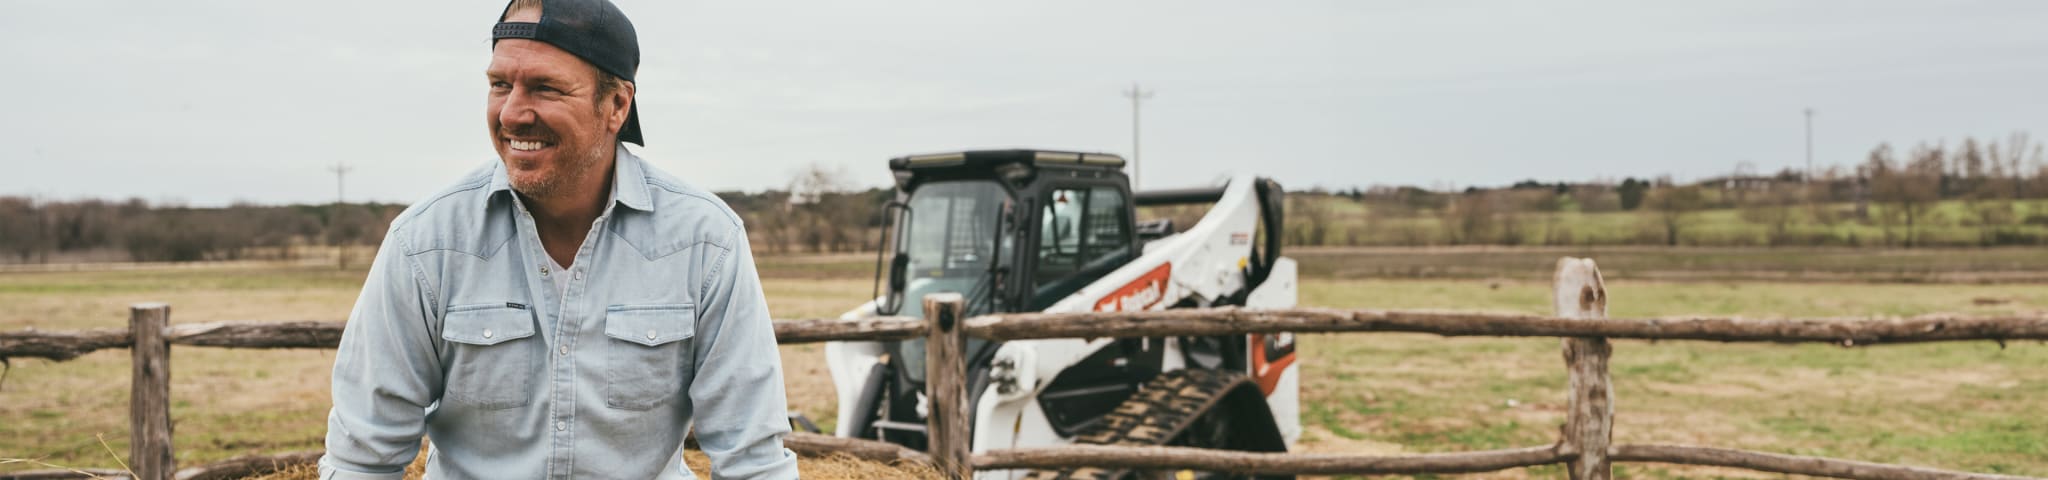 Chip Gaines Is Shown on His Property; a Bobcat T86 Compact Track Loader Is in the Background